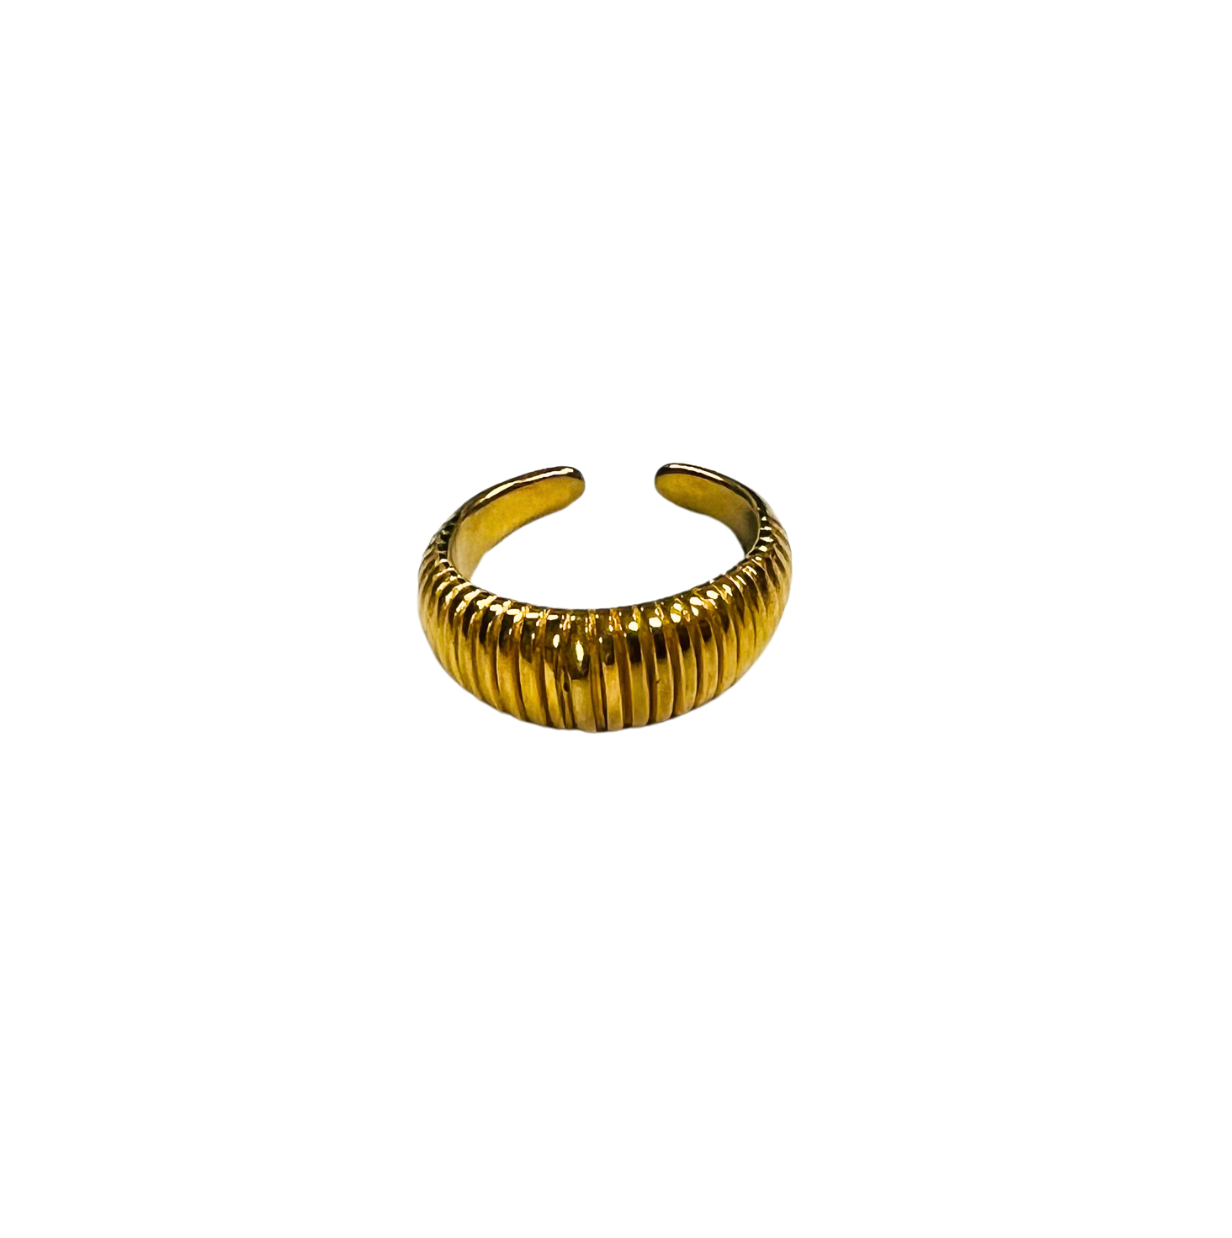 The Line Gold Ring